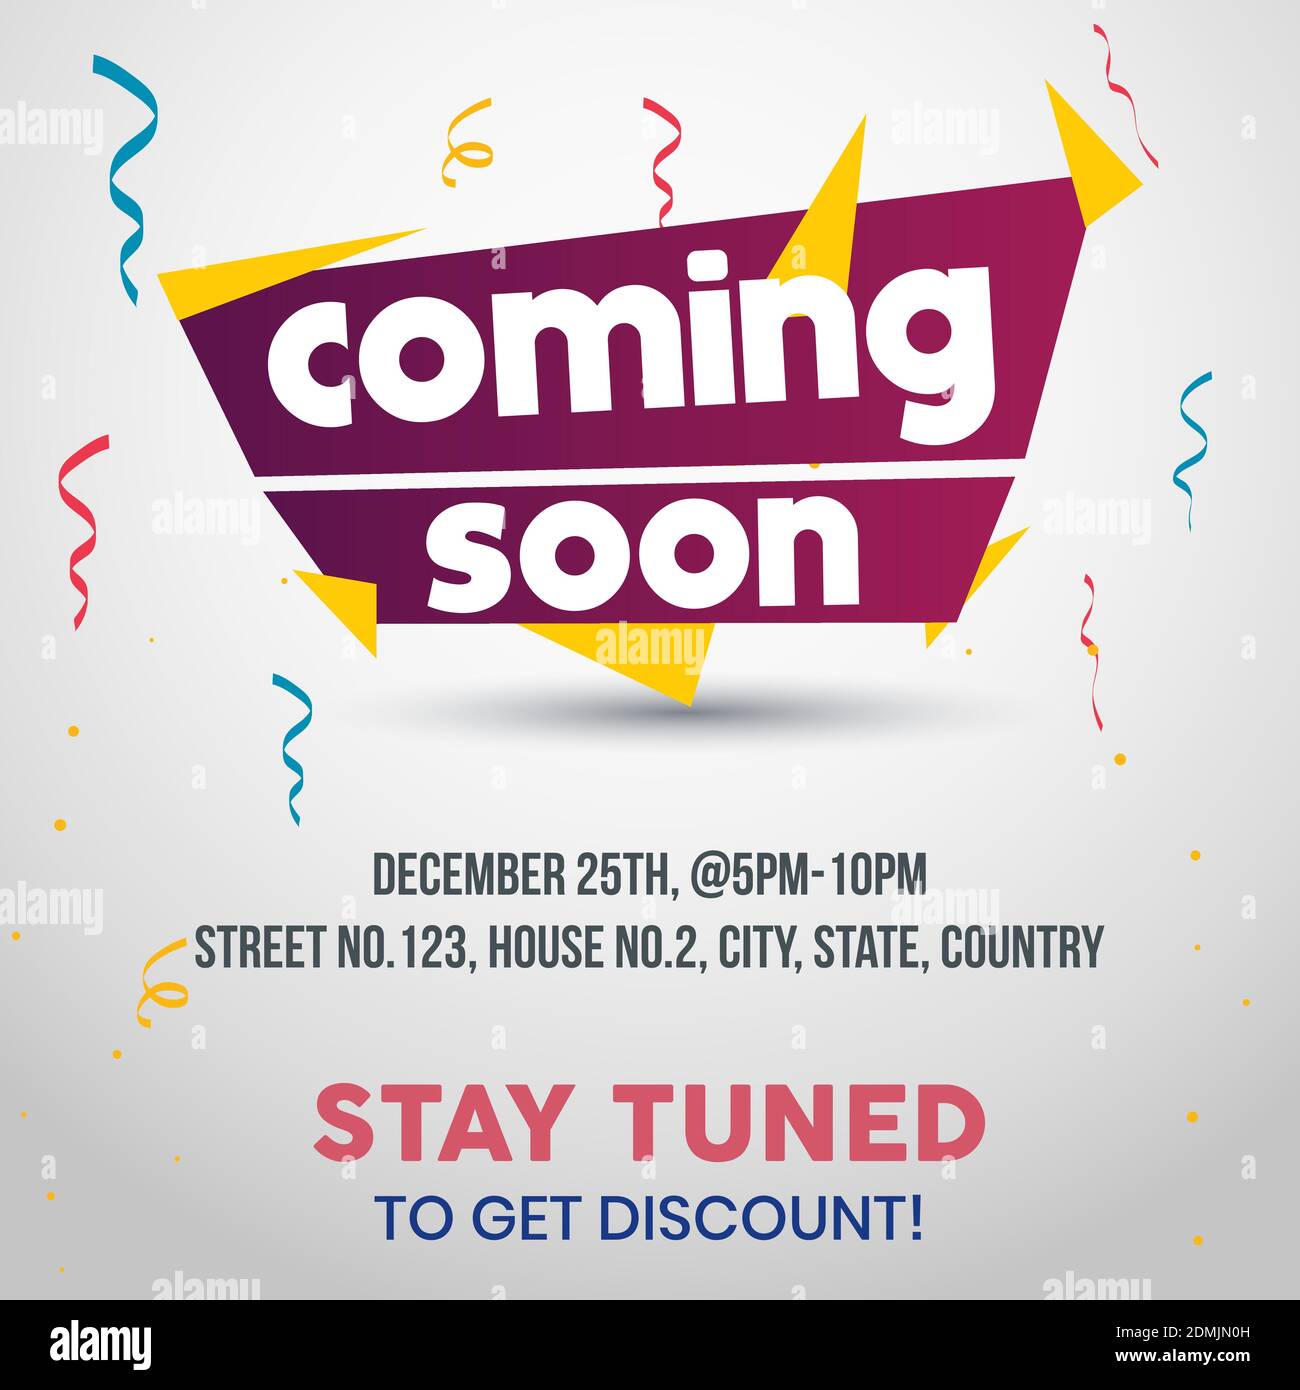 Coming Soon And Stay Tuned Post For Social Media Marketing Stay Tuned And Get Discount Post For Website And Printing Banner Template In Decent Design Stock Vector Image Art Alamy